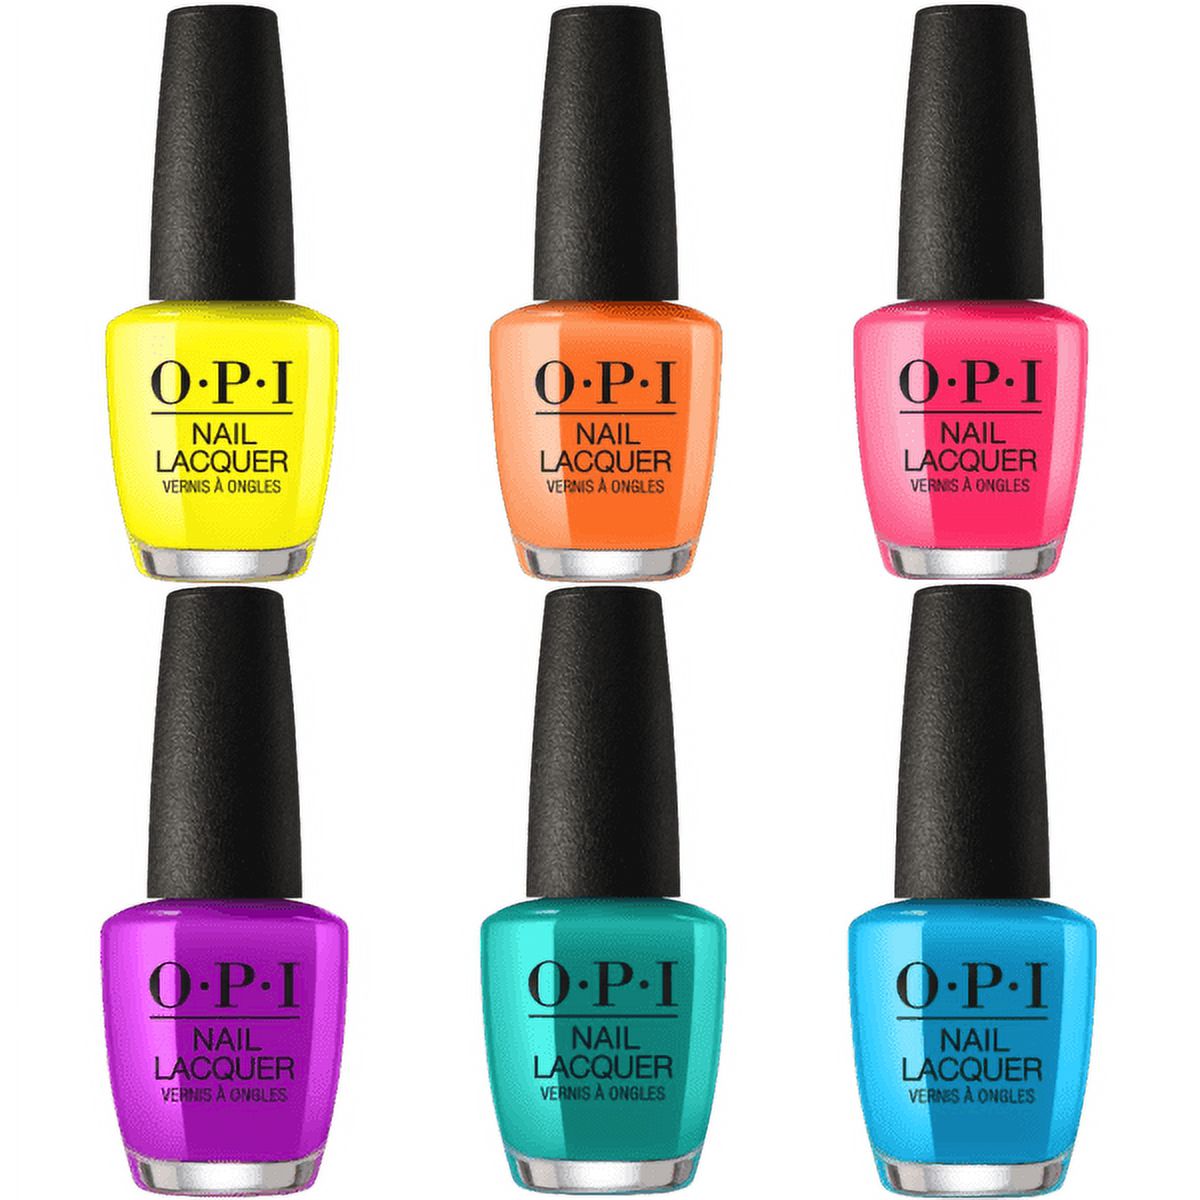 OPI Nail Polish, 6-Piece Neon Collection, 0.5 fl oz each - image 1 of 1